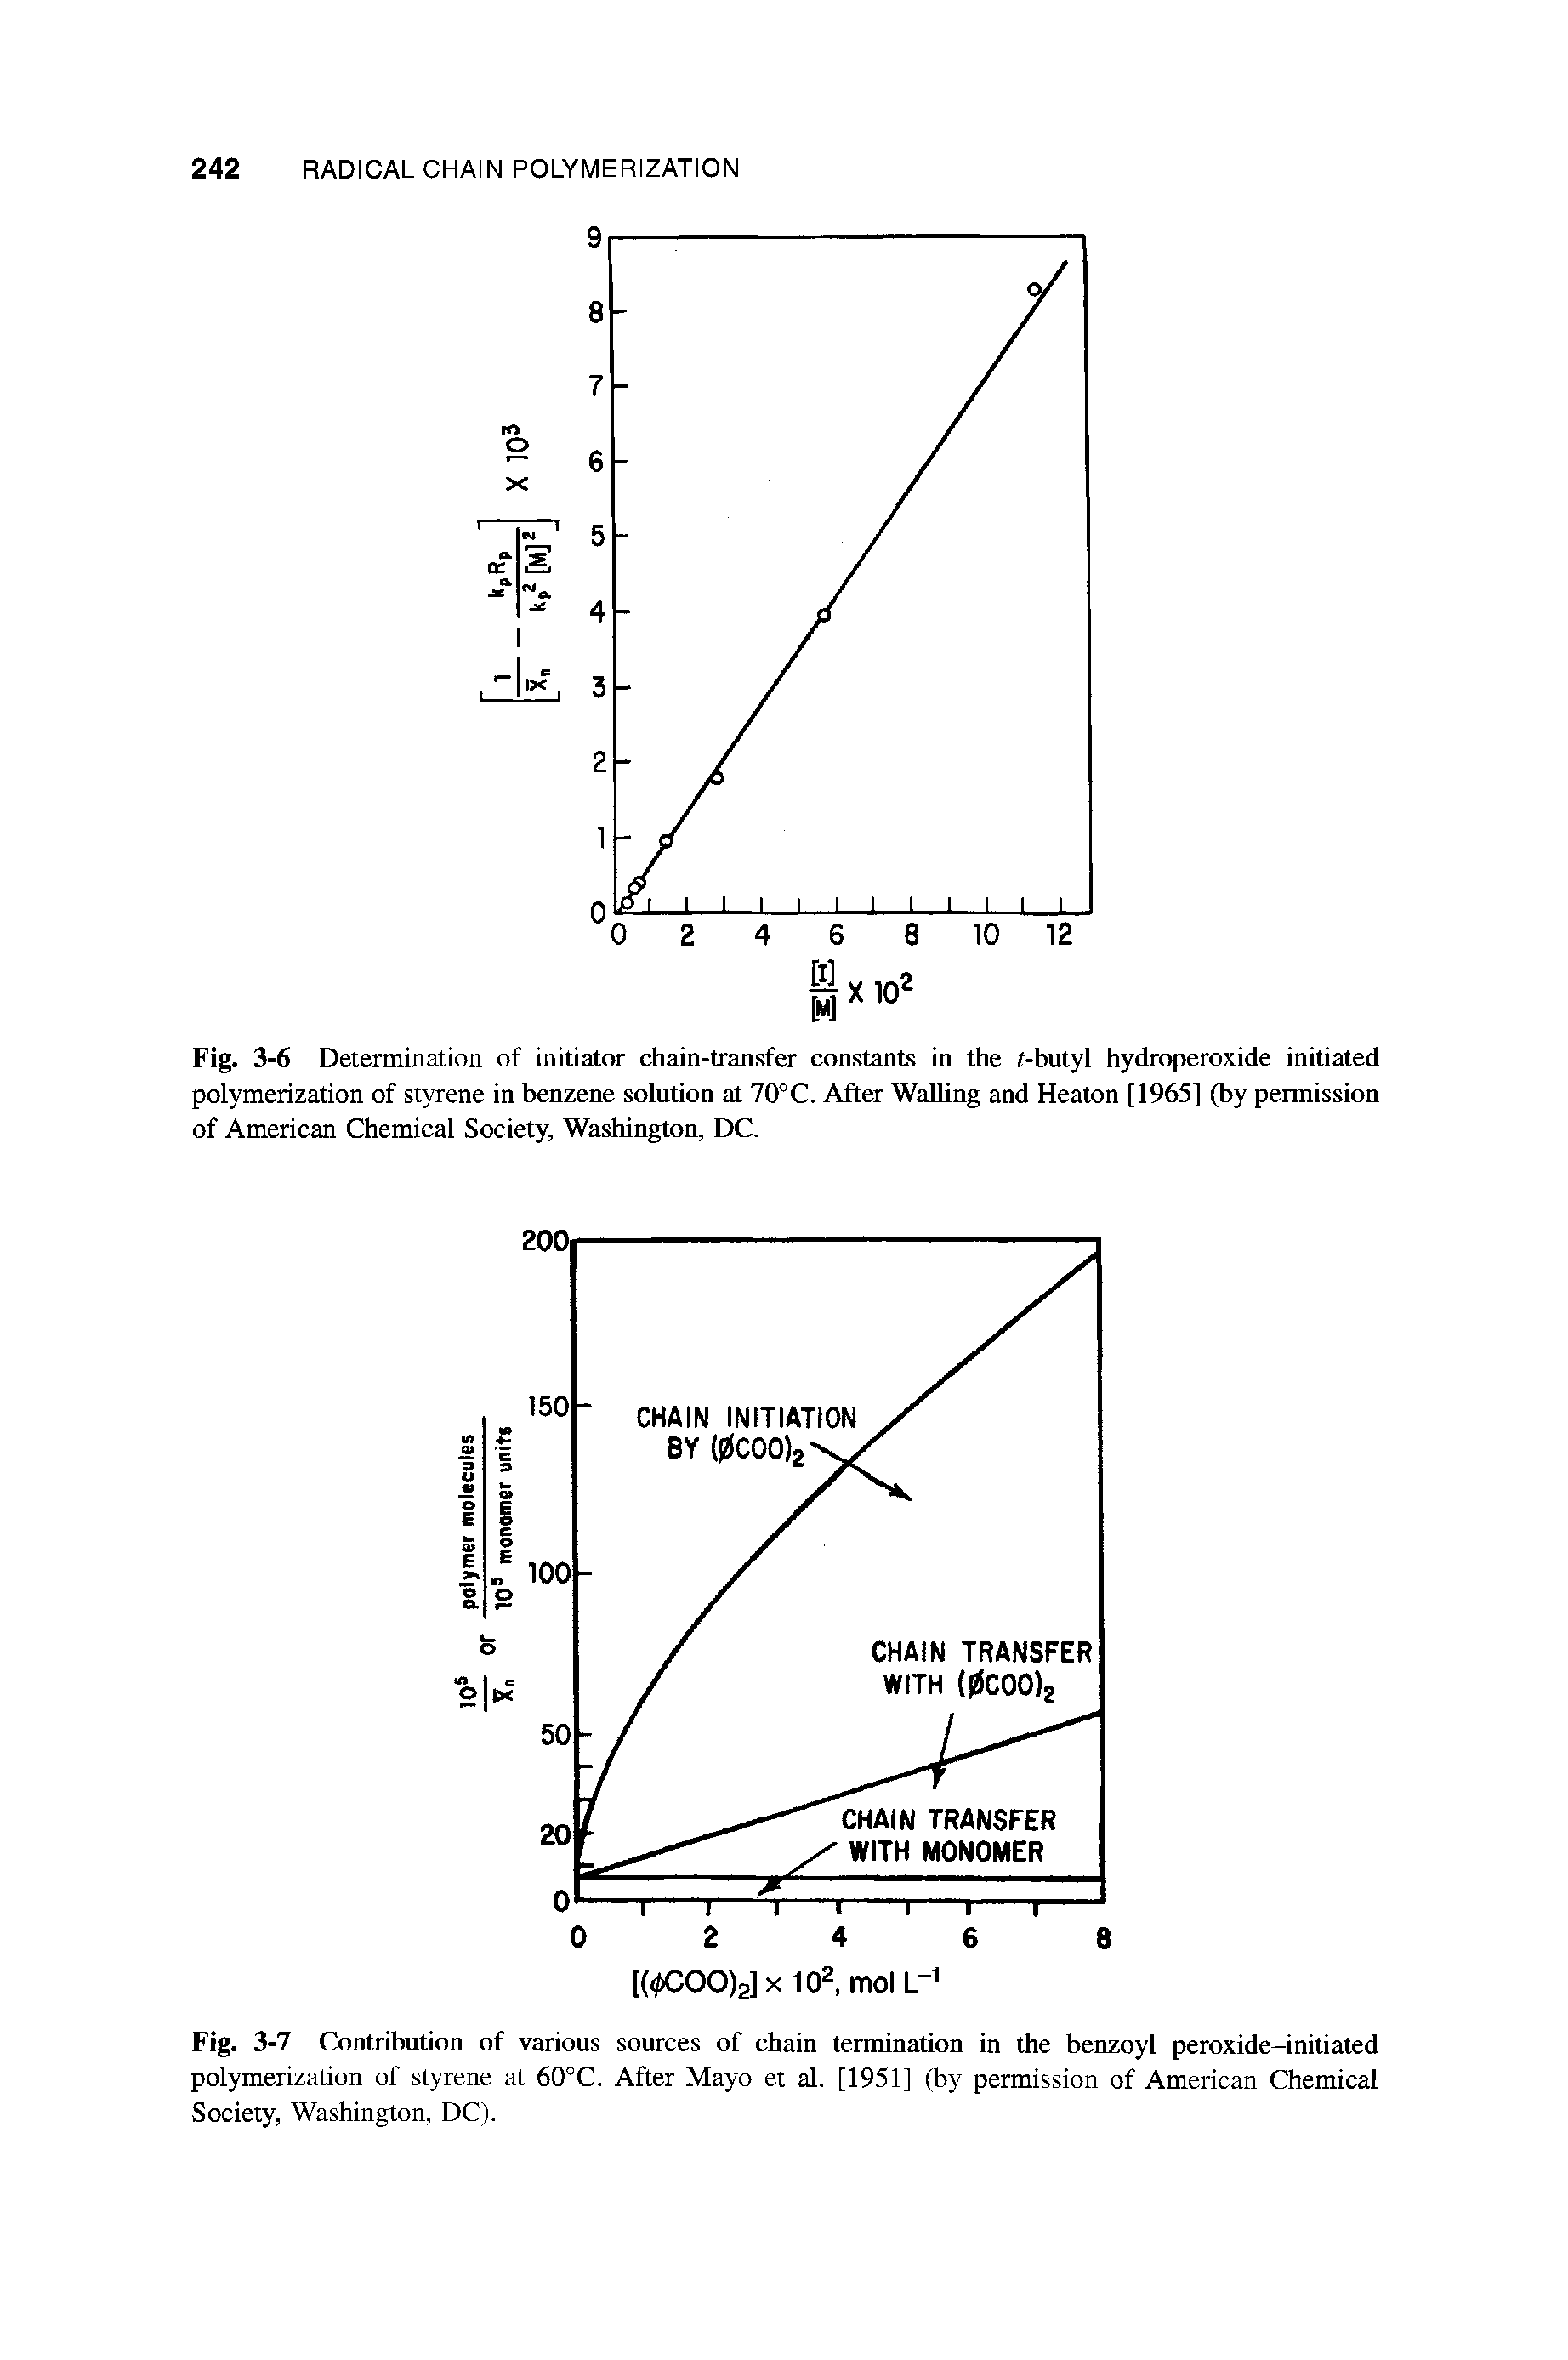 Fig. 3-6 Determination of initiator chain-transfer constants in the t-butyl hydroperoxide initiated polymerization of styrene in benzene solution at 70°C. After Walling and Heaton [1965] (by permission of American Chemical Society, Washington, DC.